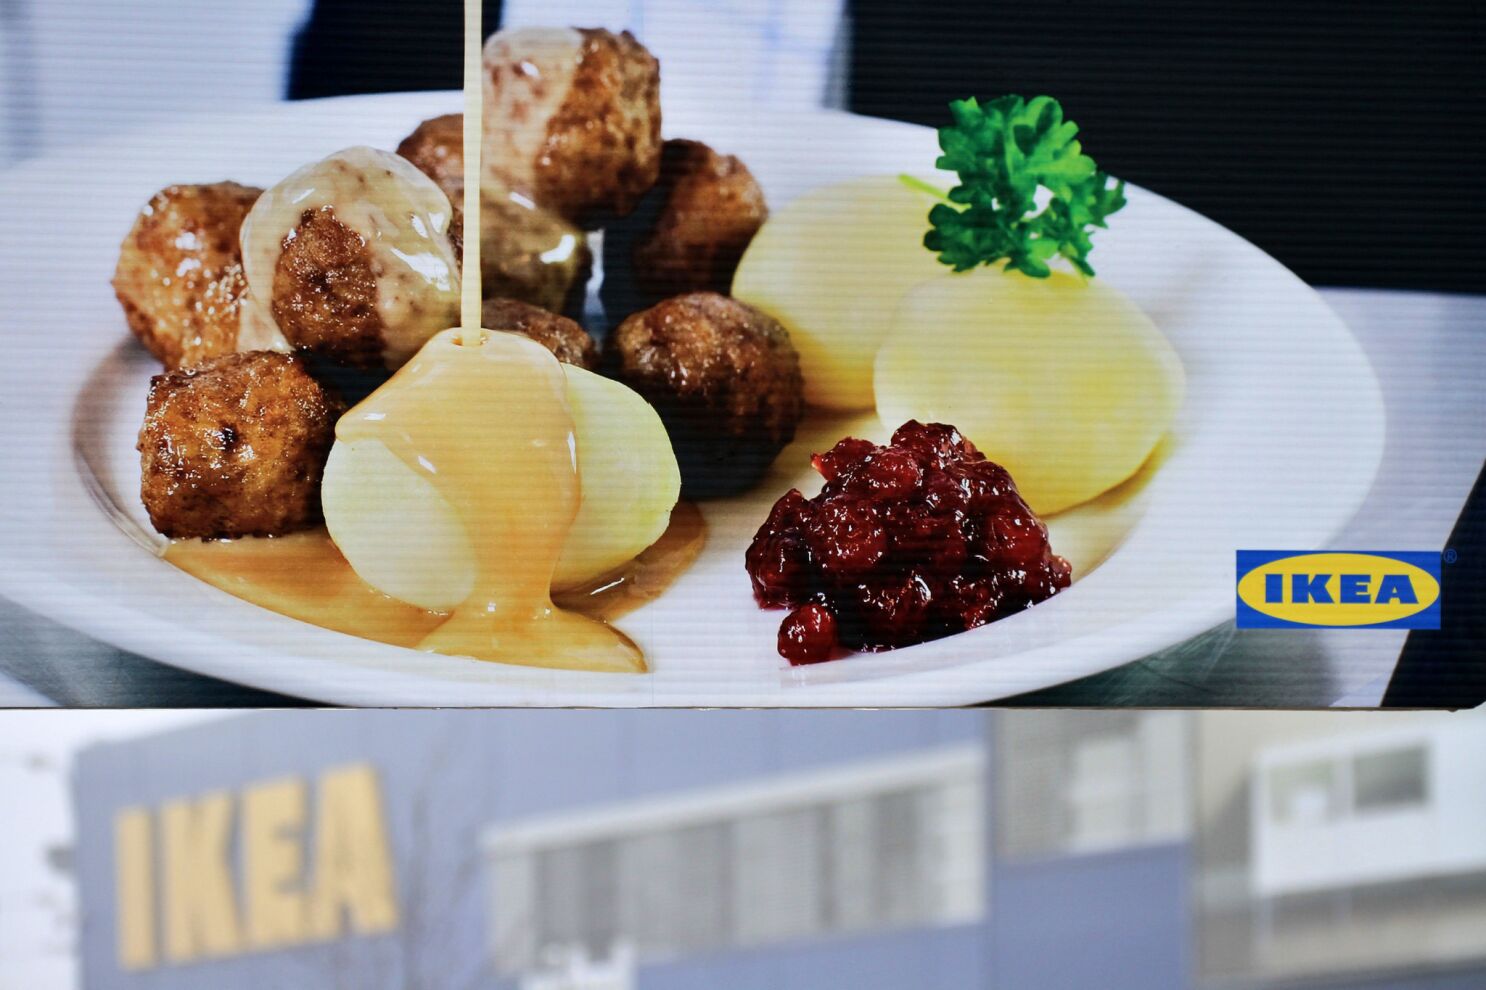 meat found in Ikea meatballs sold - Los Angeles Times